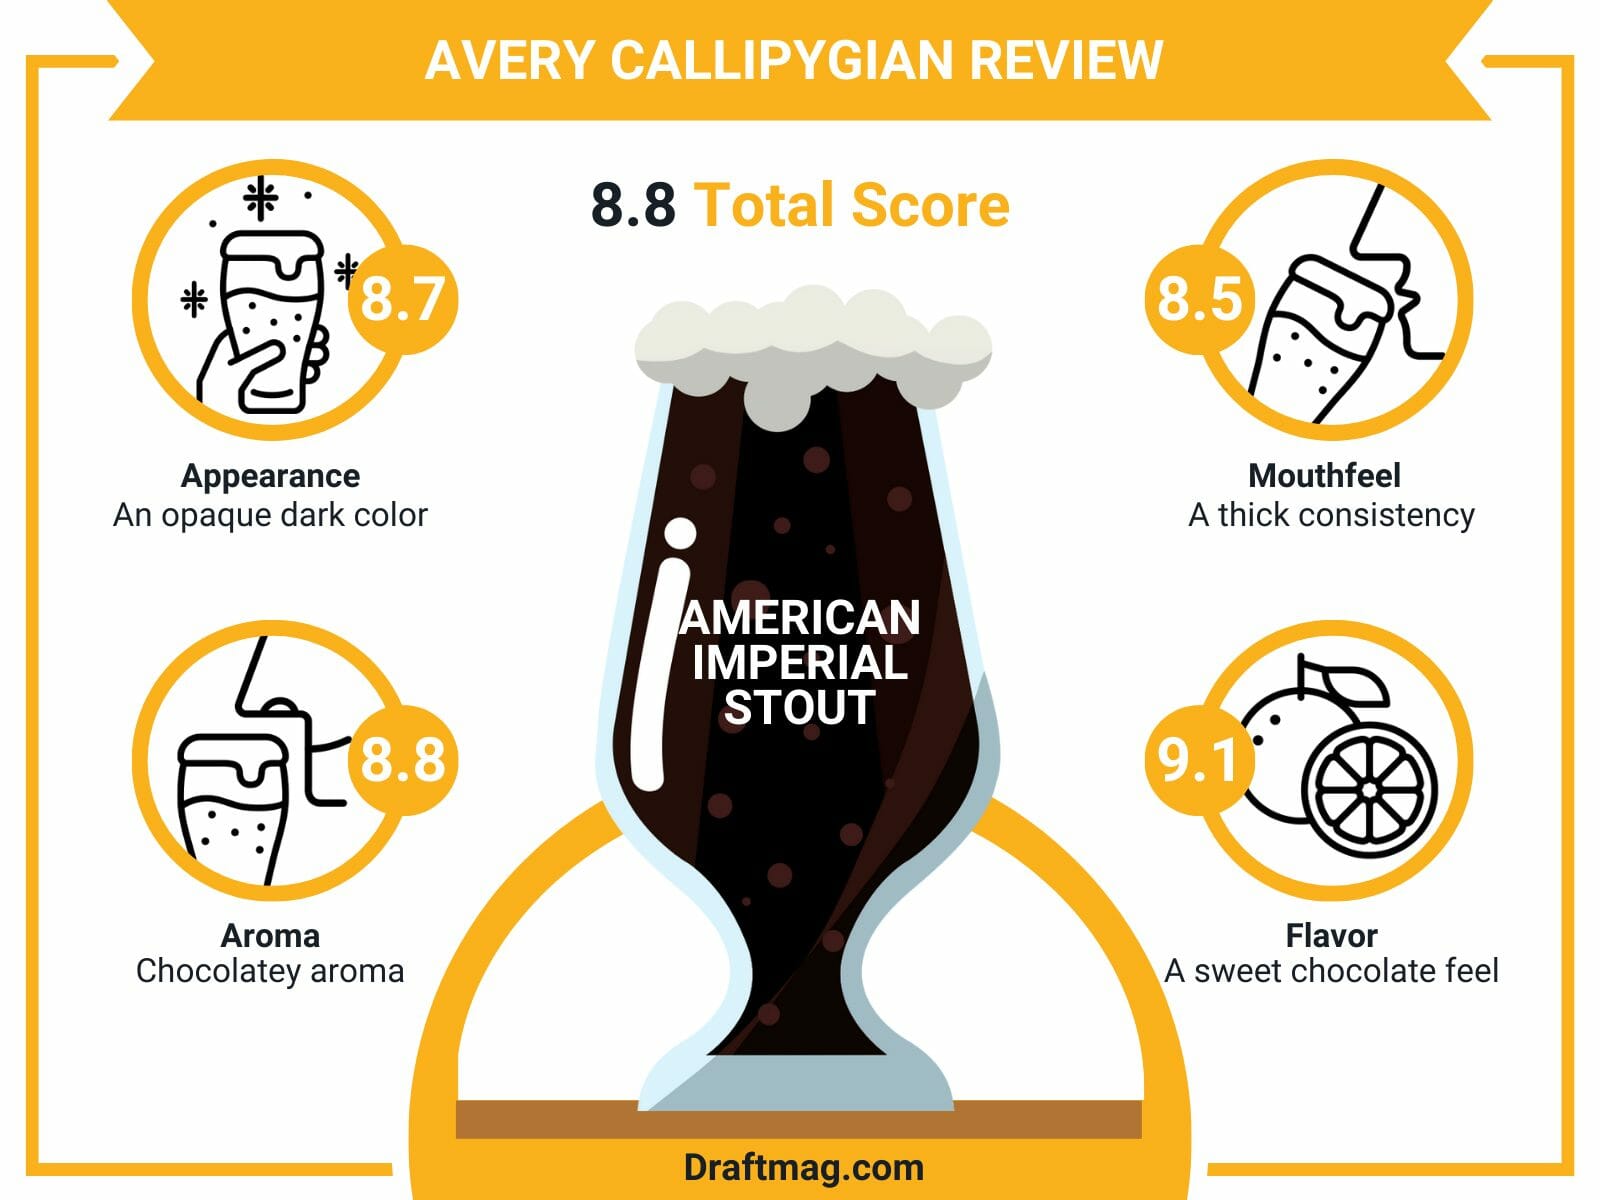 Avery callipygian review infographic